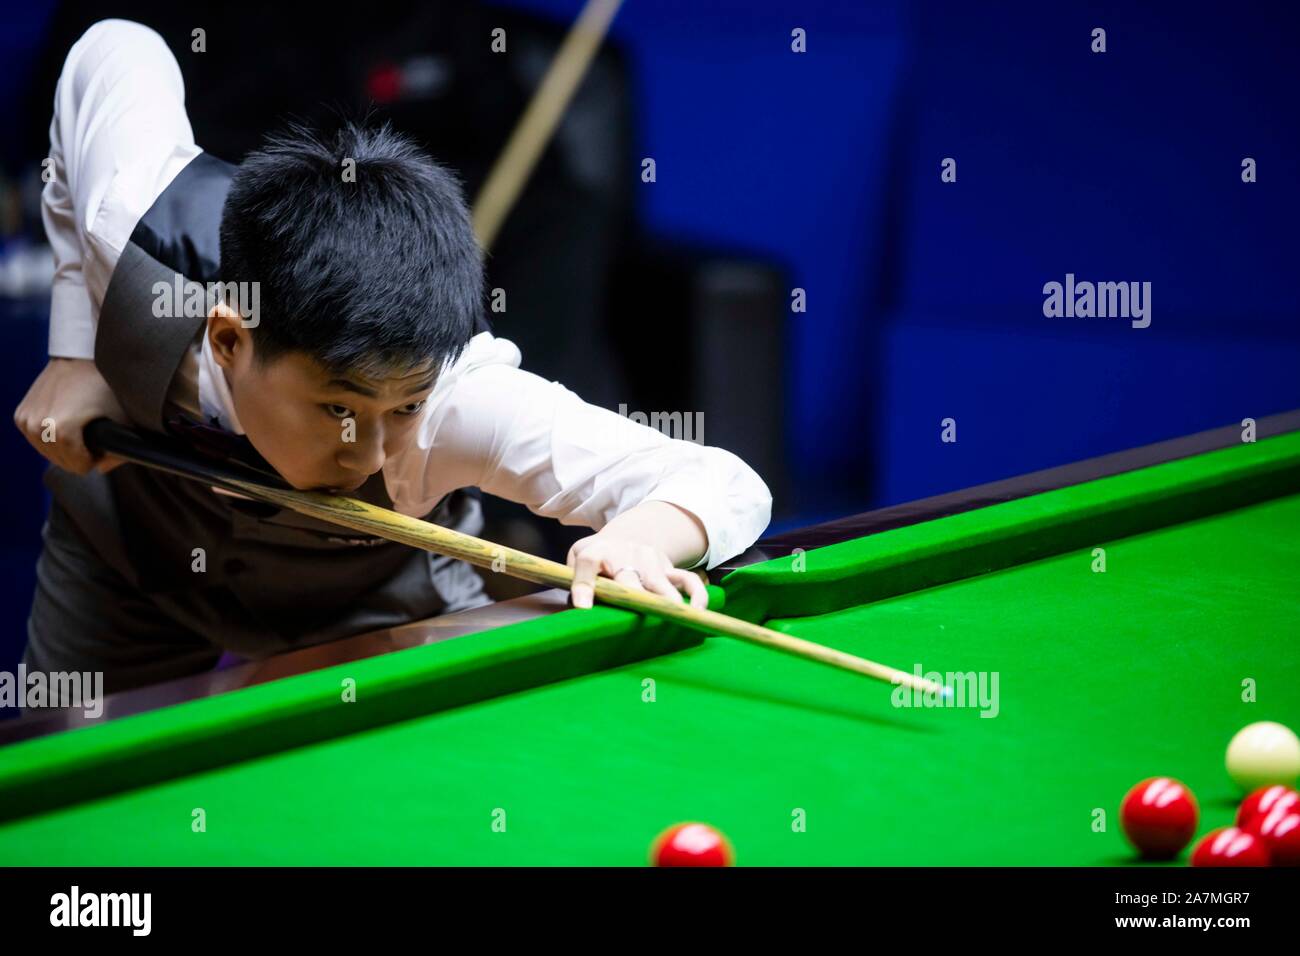 Chinese professional snooker player Wu Haotian plays a shot at the Round 1 of 2019 Snooker Shanghai Masters in Shanghai, China, 8 September 2019